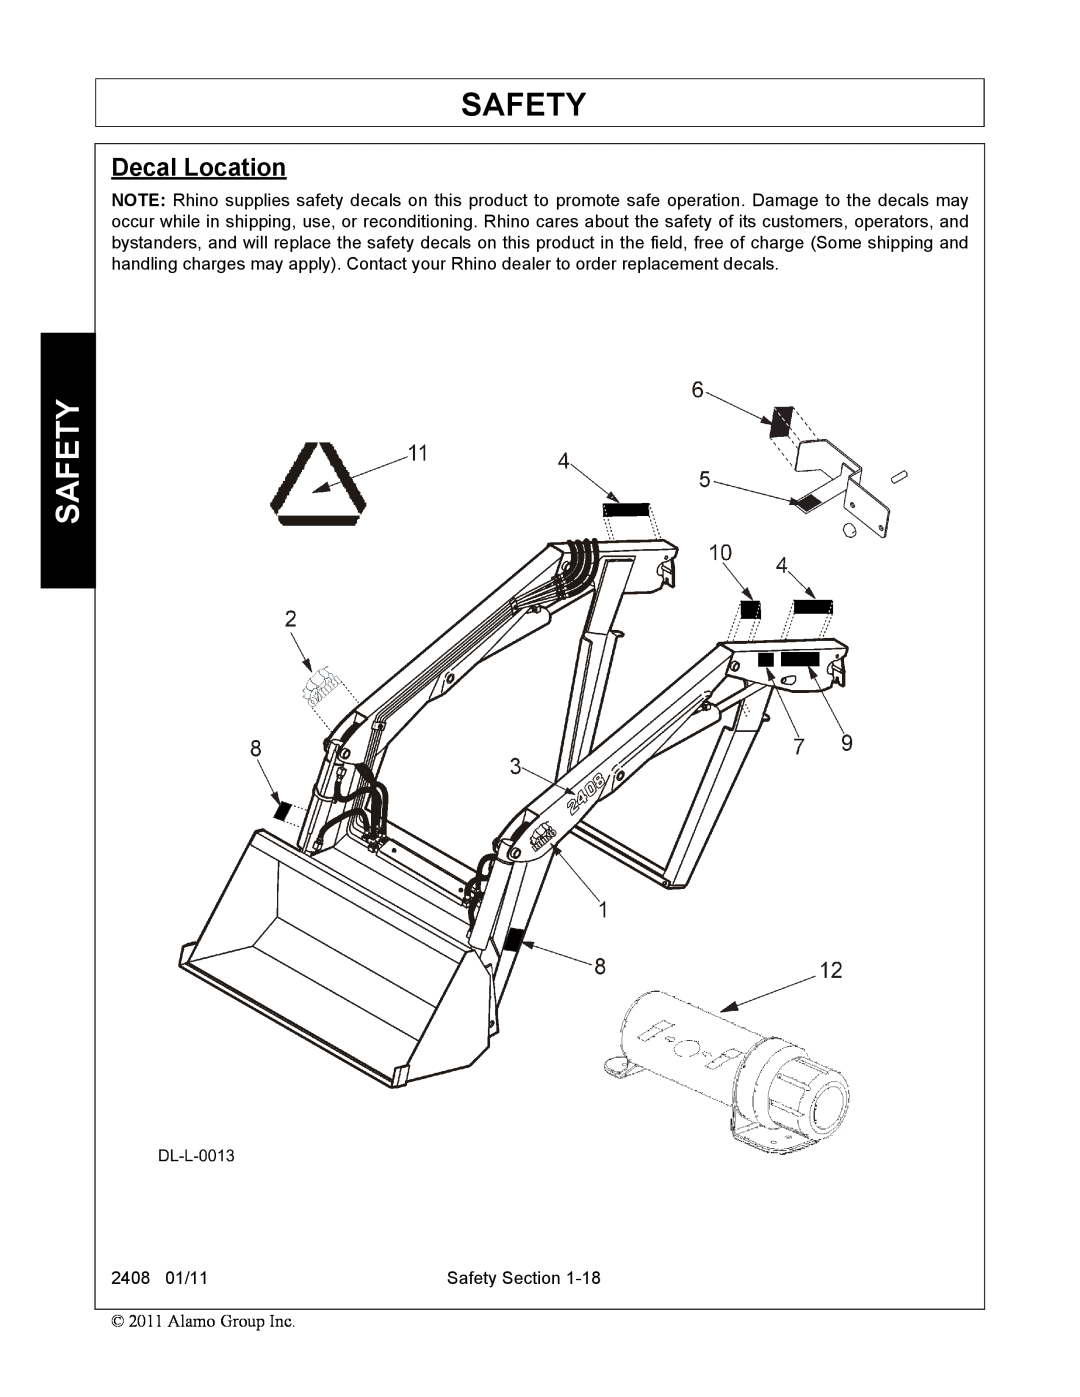 Rhino Mounts 2408 manual Safety, Decal Location 